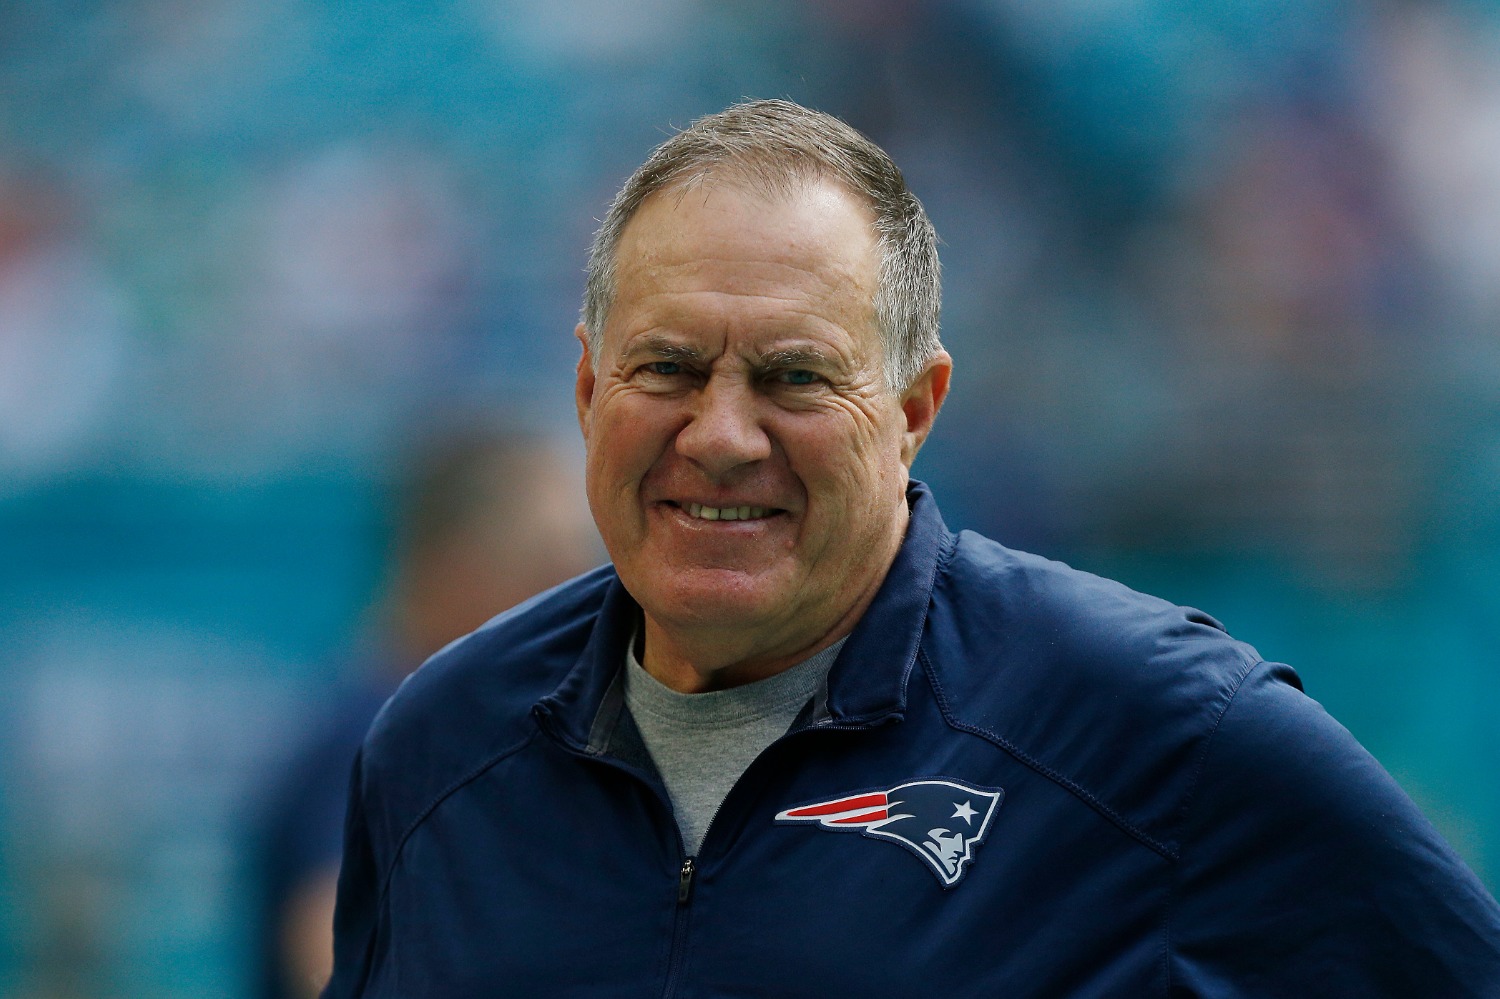 Bill Belichick just utilized a new loophole in the NFL rules to address the Patriots' glaring roster hole.